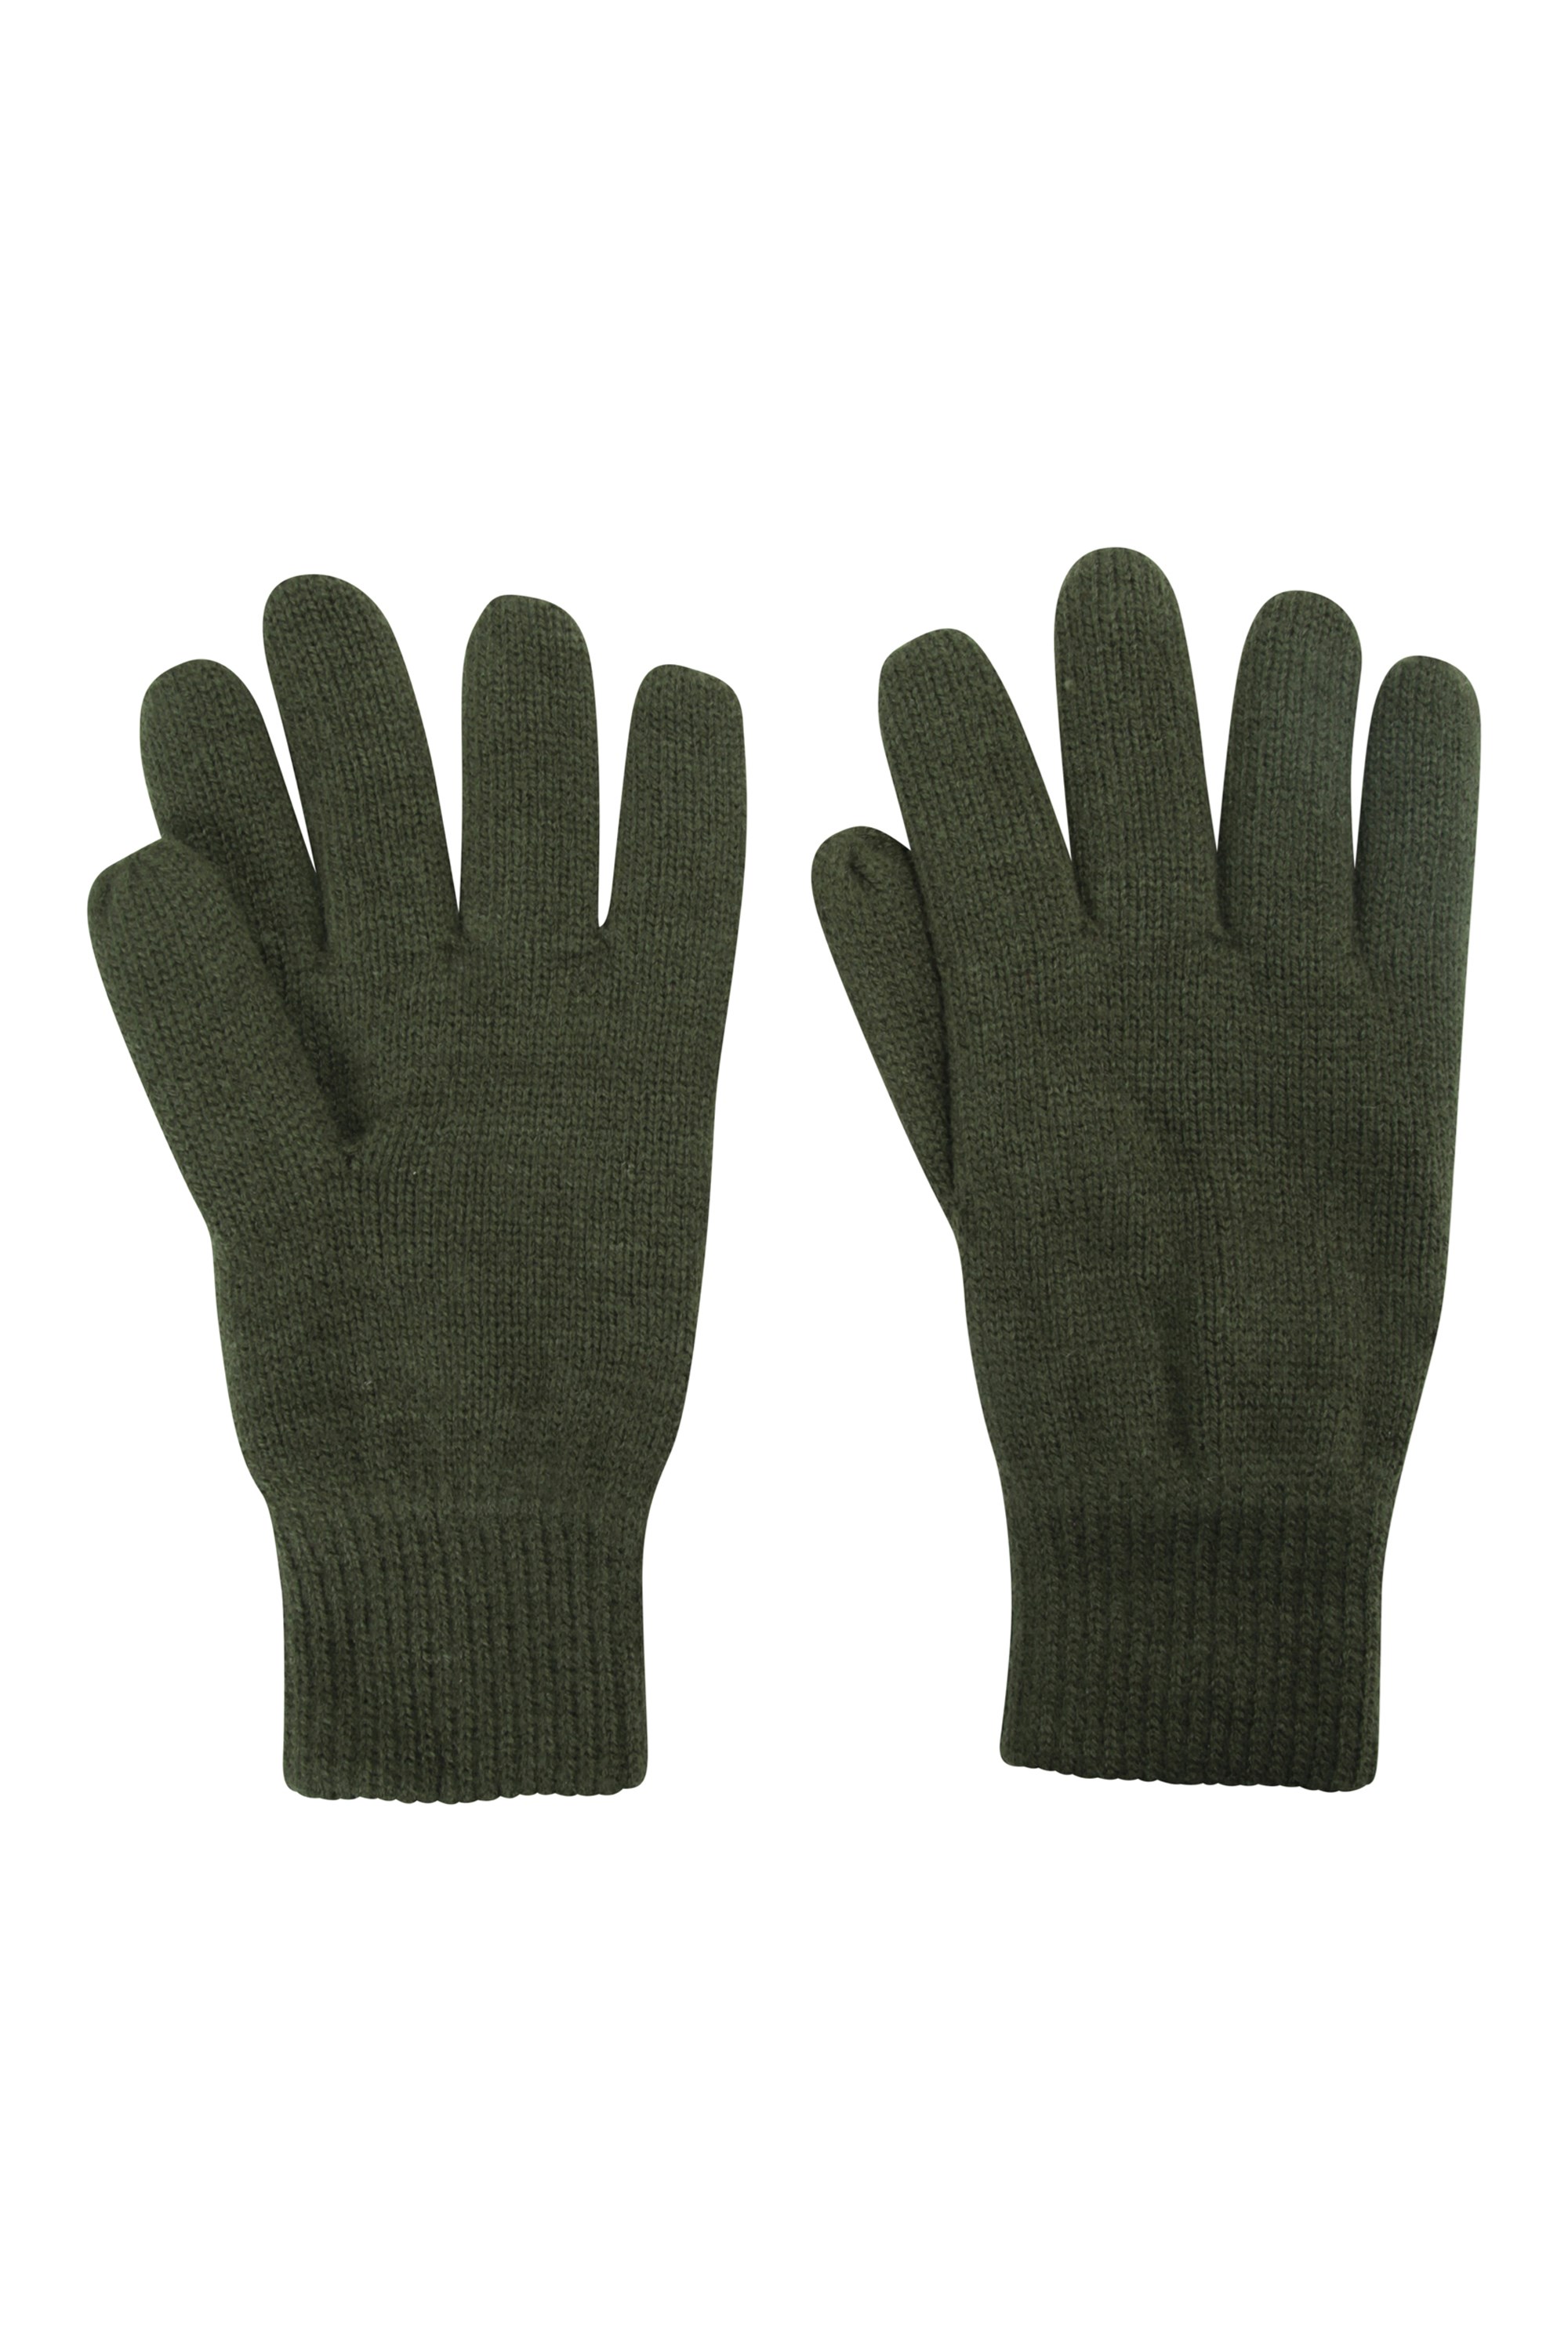 Mountain Warehouse Thinsulate Mens Knitted Gloves Green